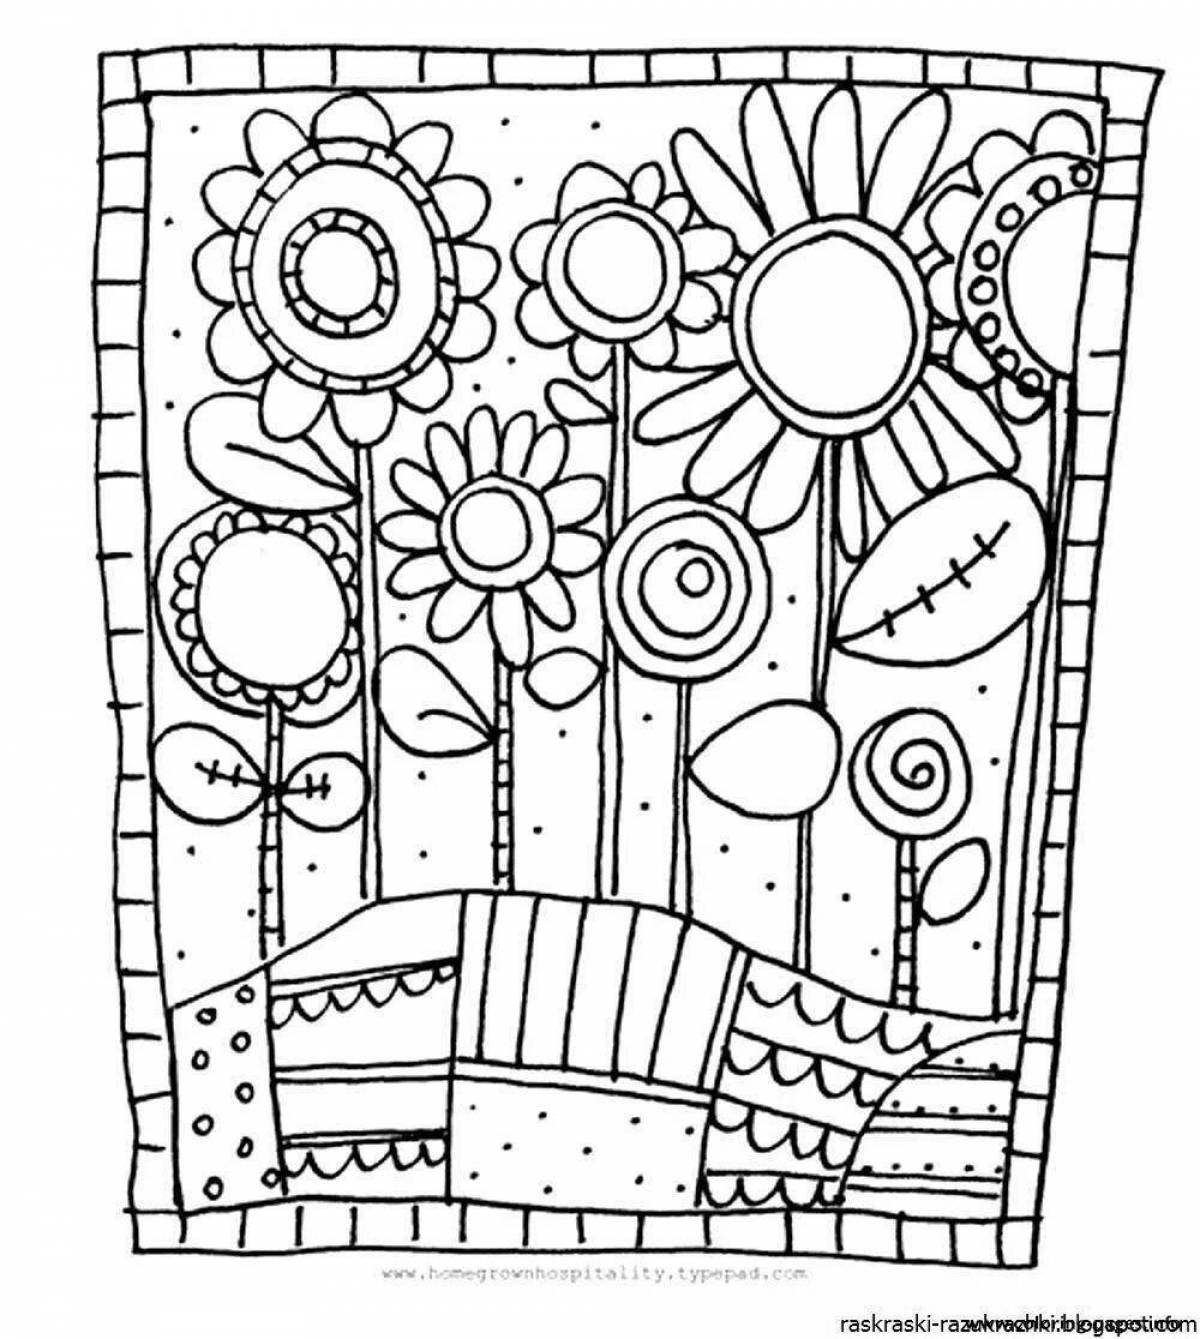 Crazy pinterest coloring book for kids